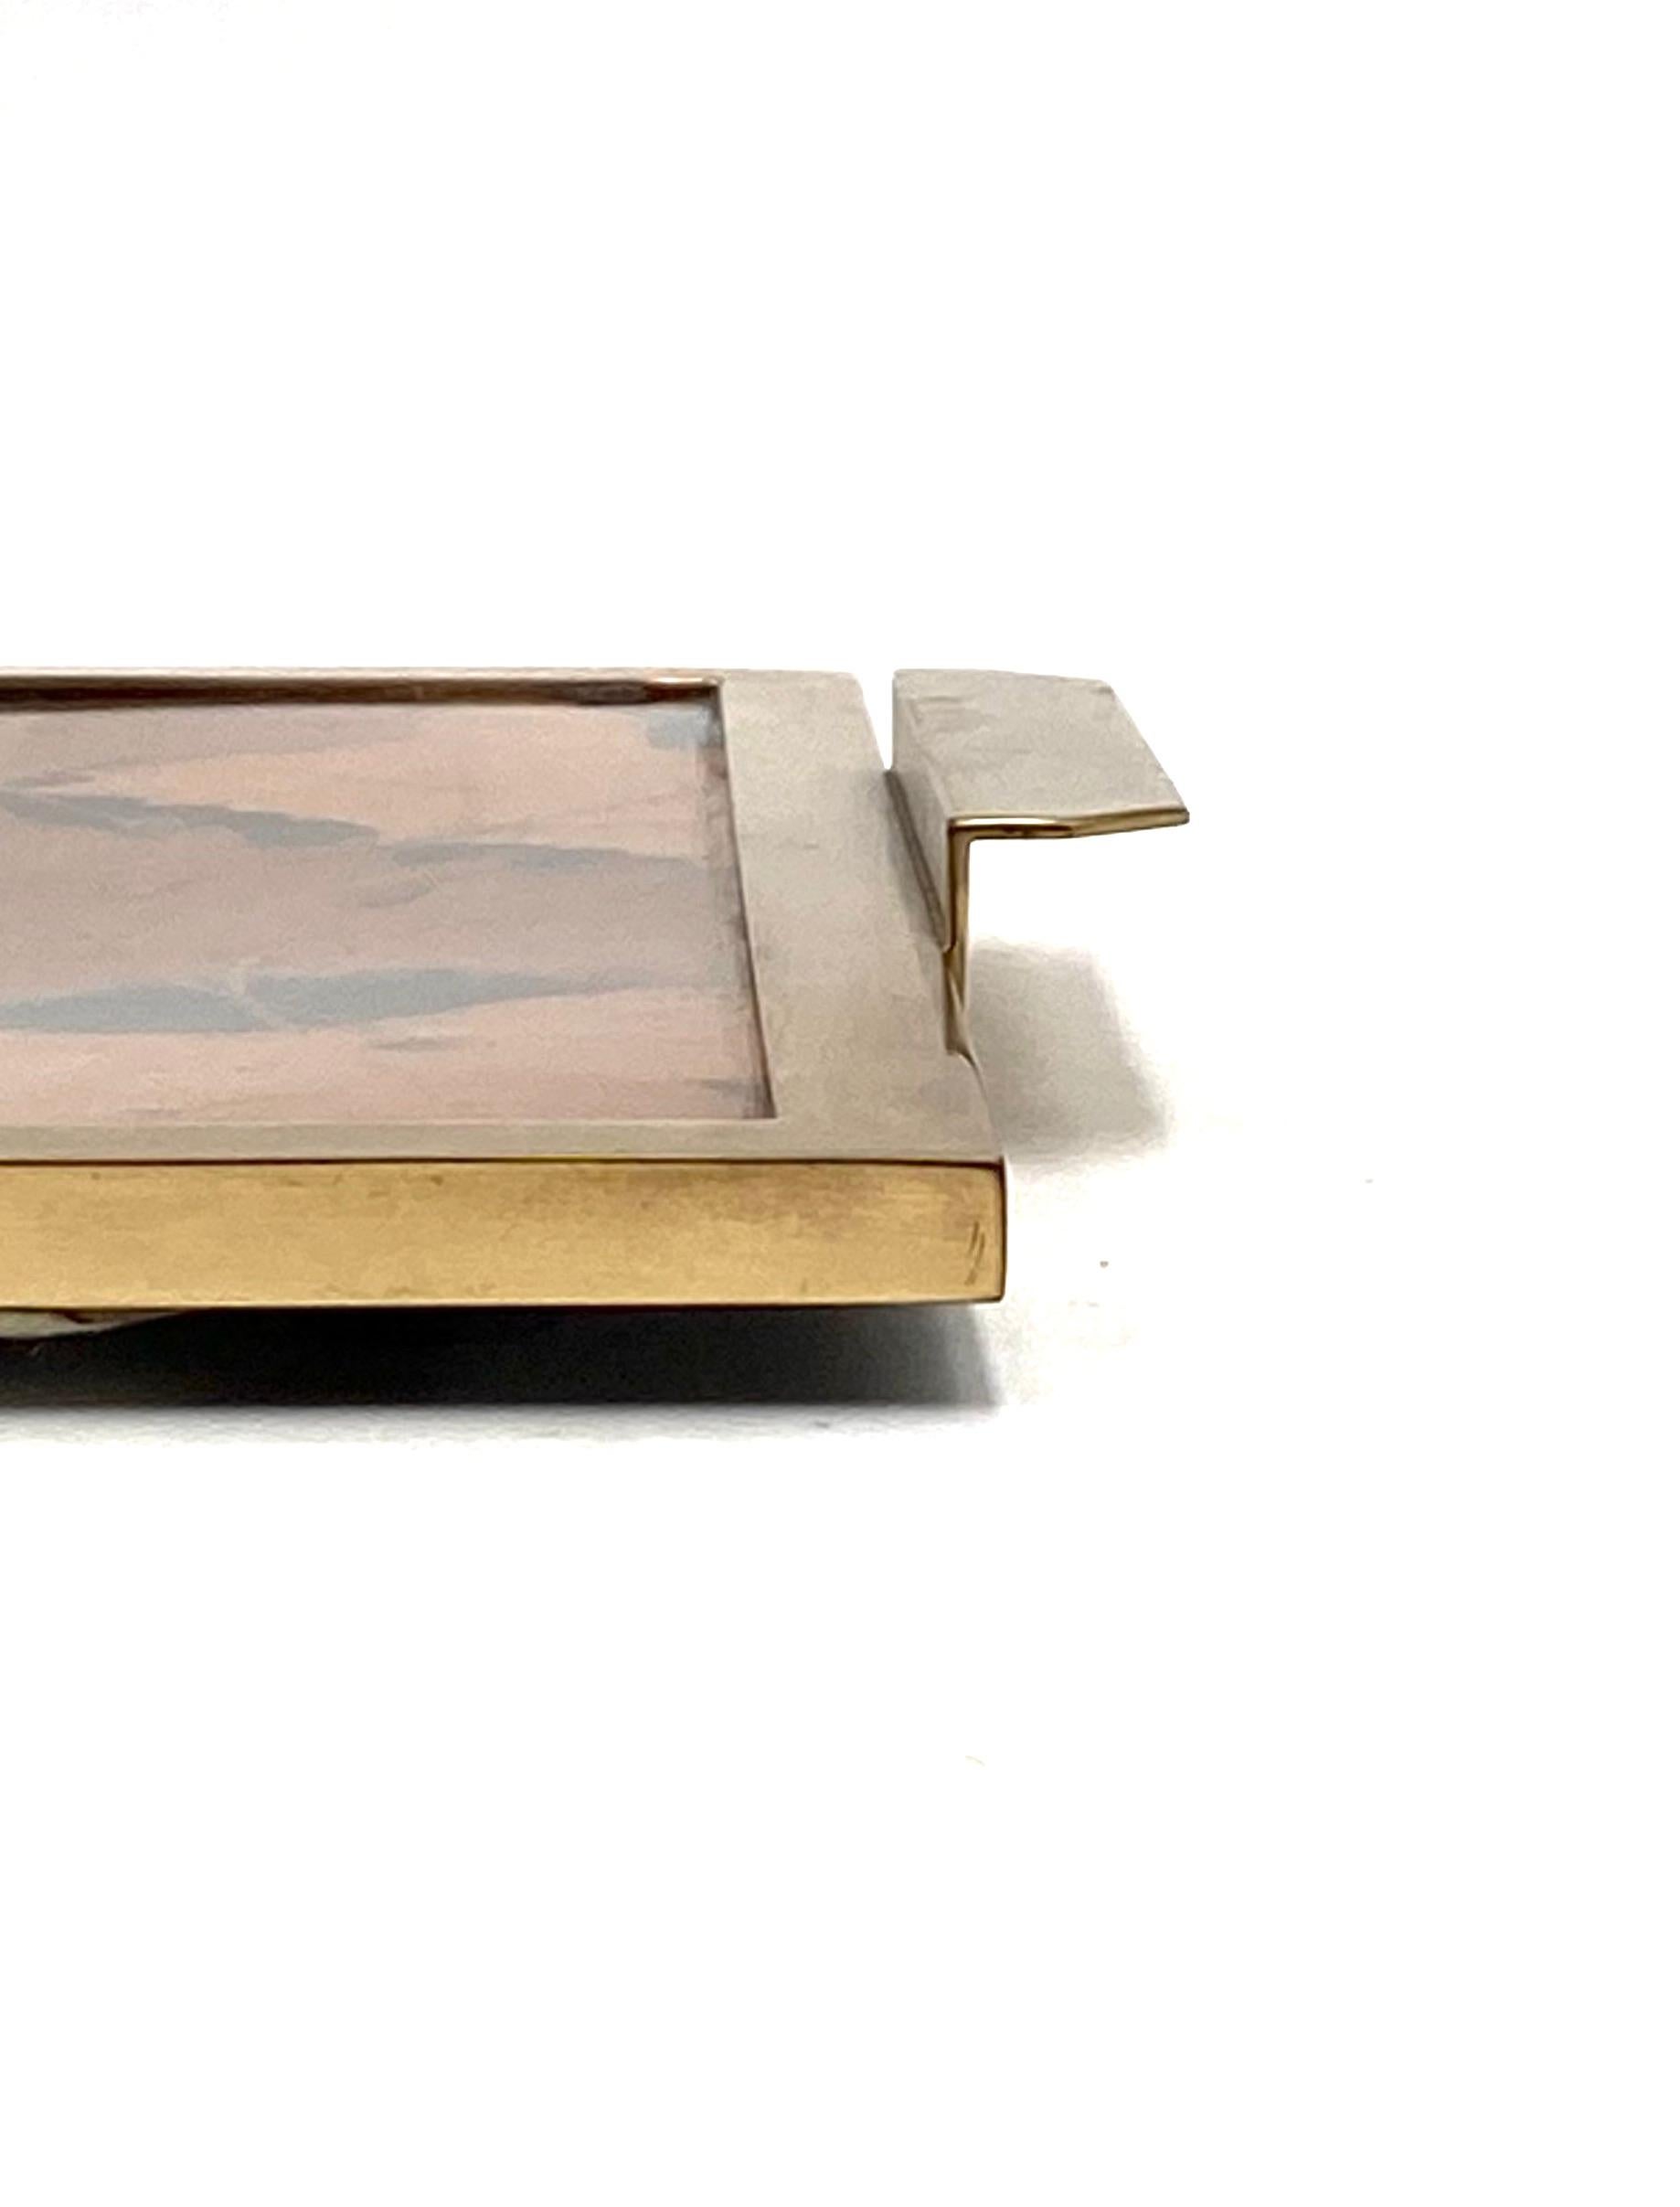 Hollywood regency brass and leaves resin tray, Montagnani Firenze Italy 1970s For Sale 13